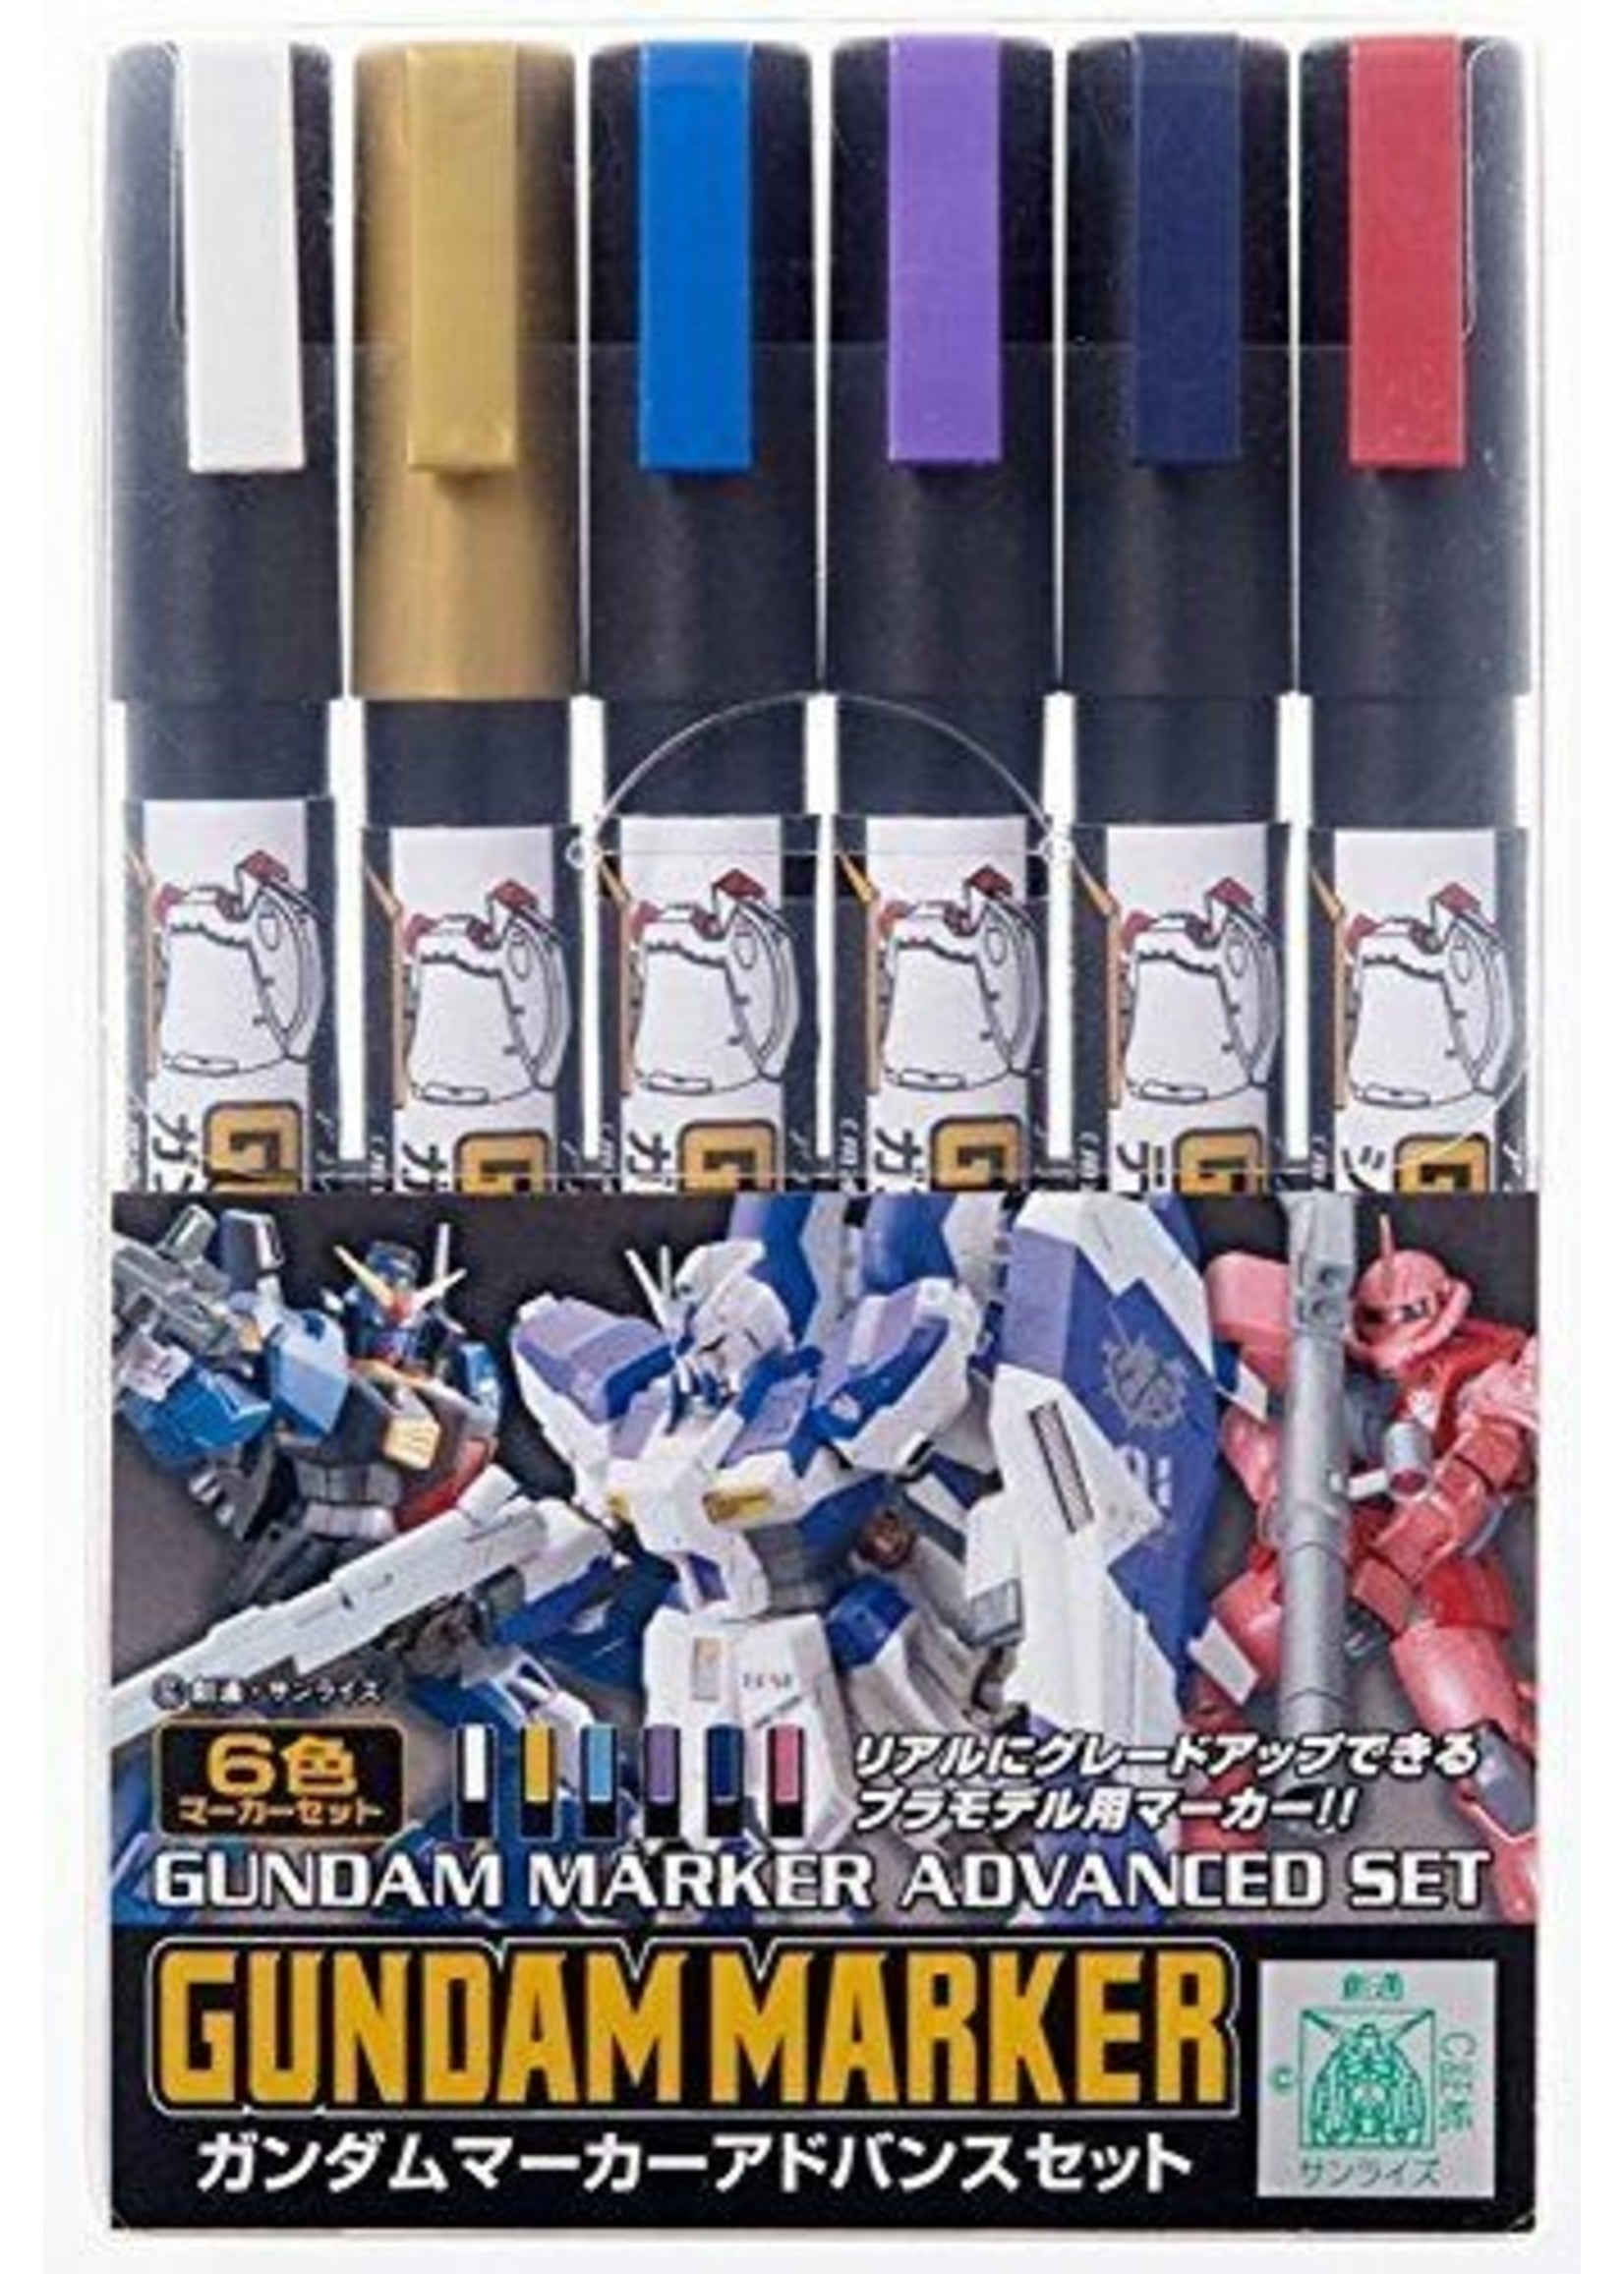 GSI Creos to Release a Set of Silver and Gold Gundam Markers EX